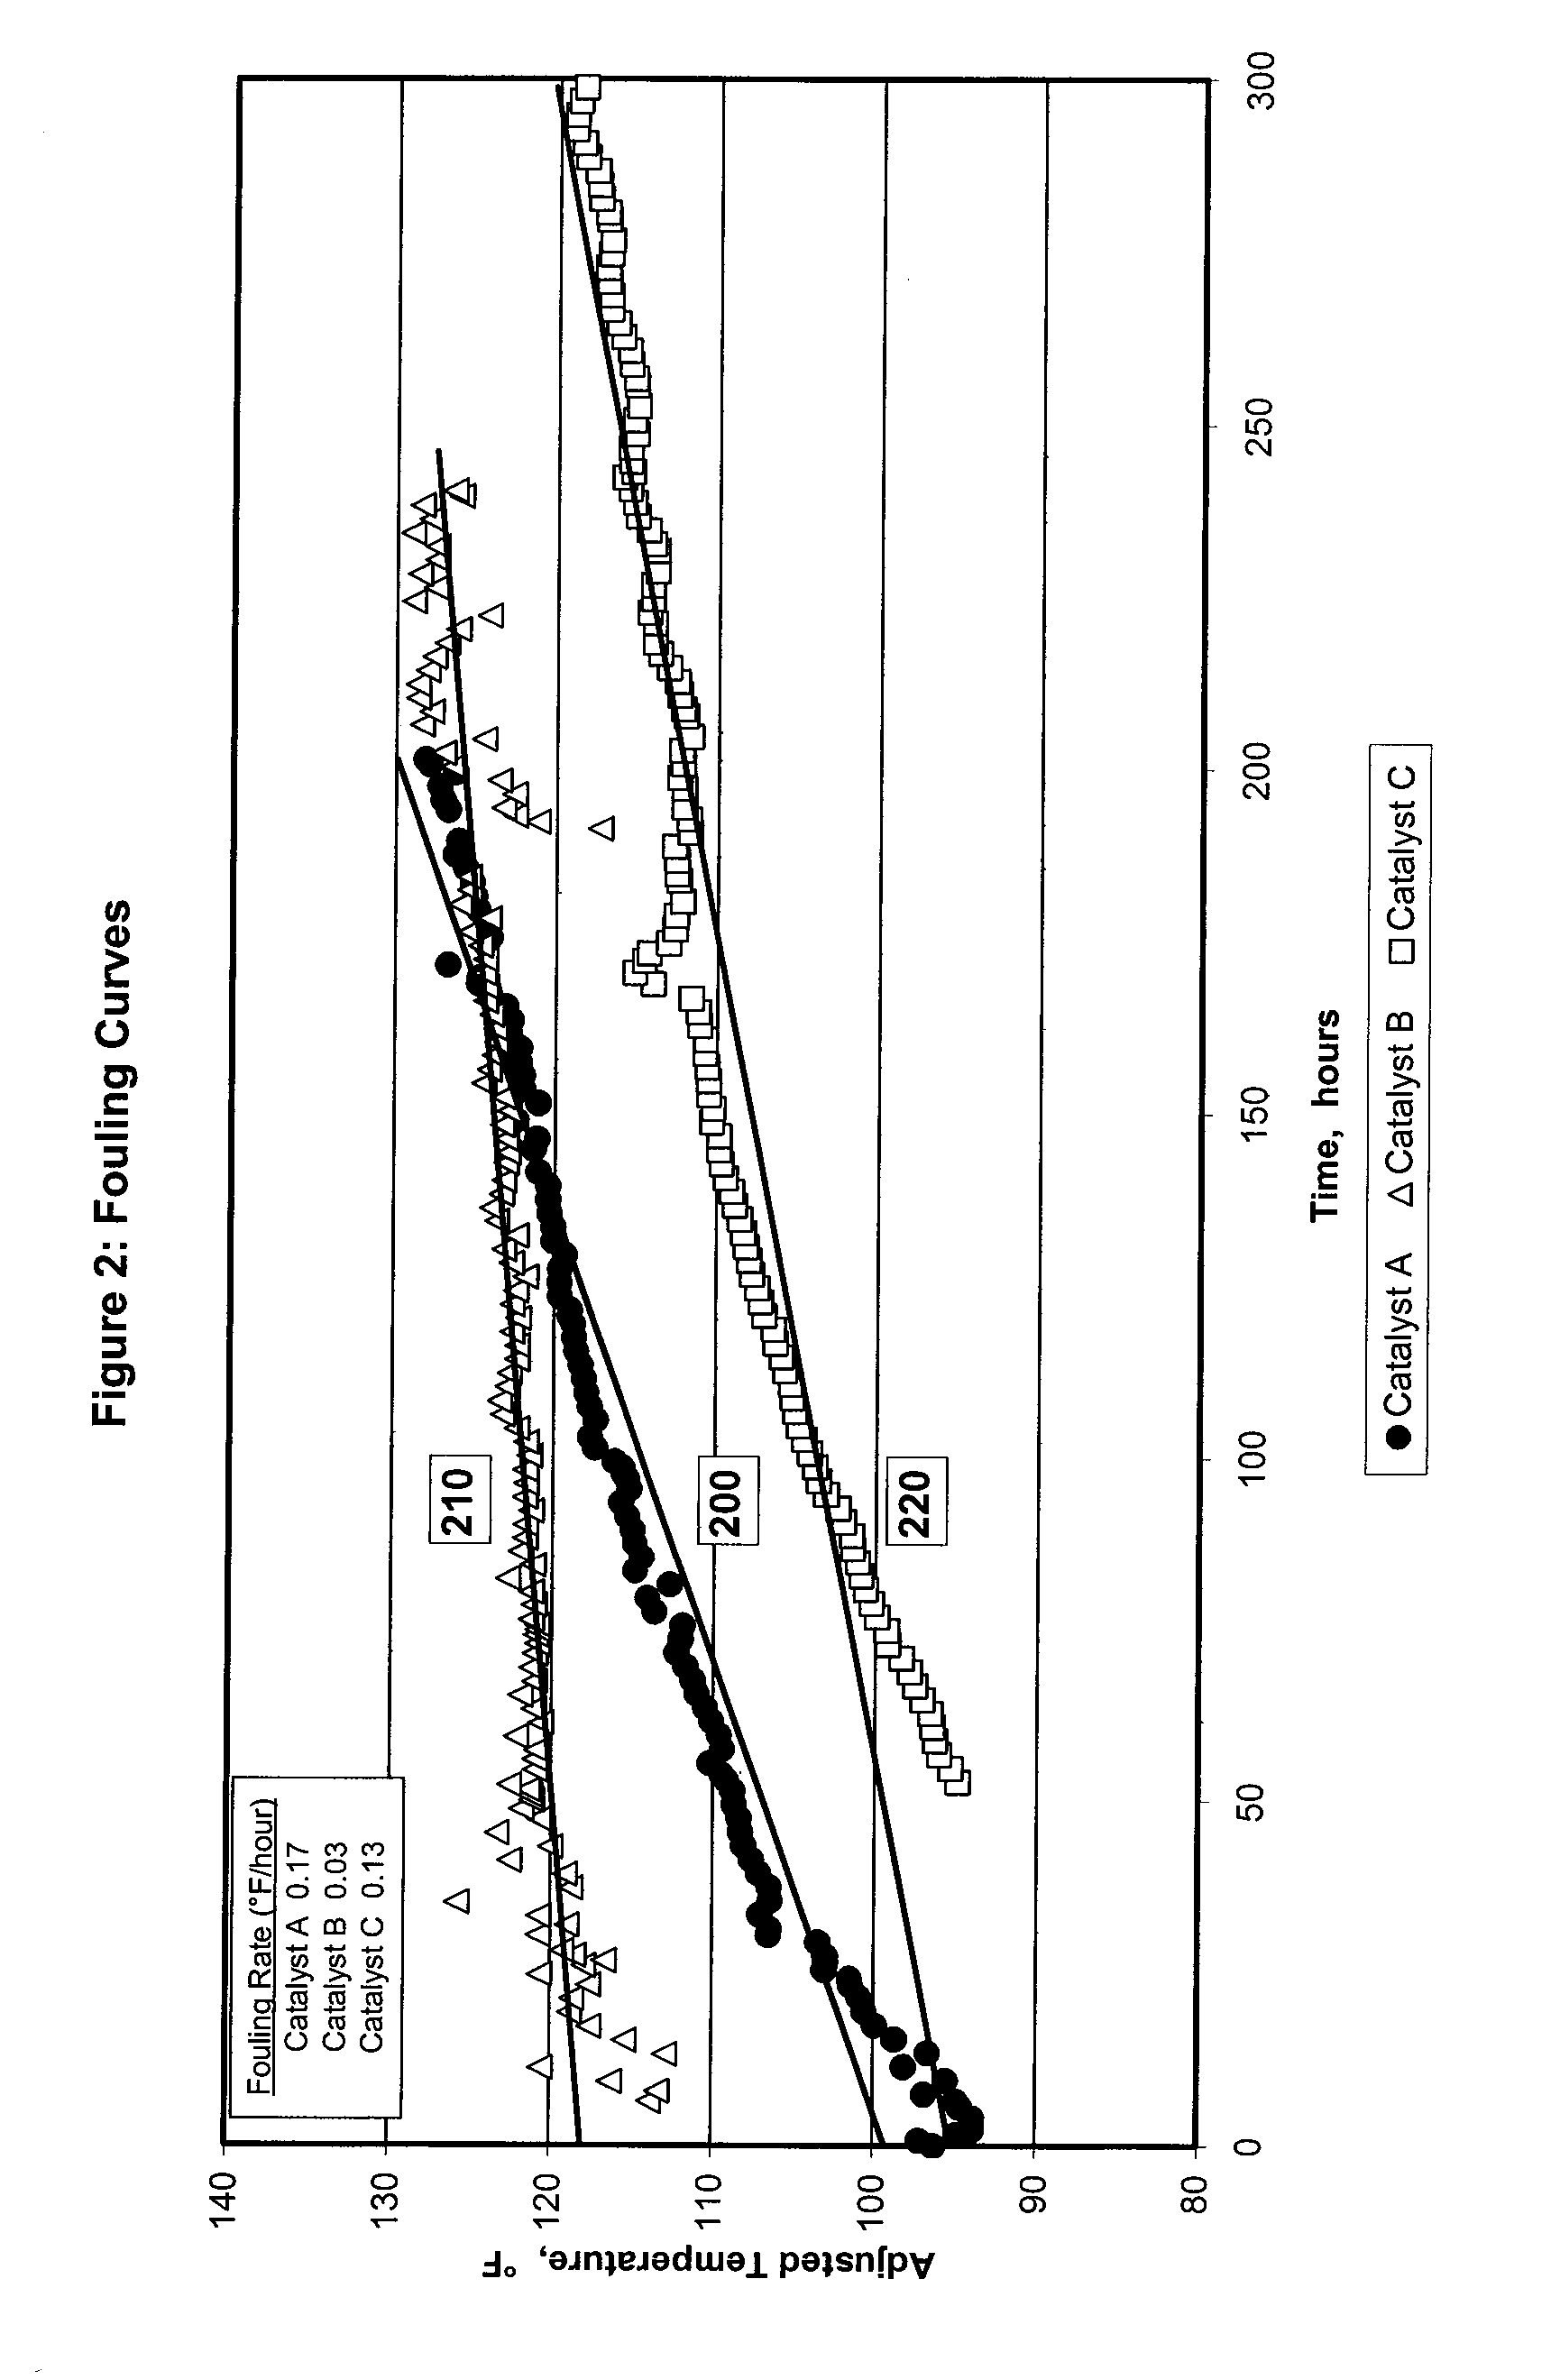 Selective hydrogenation catalyst and methods of making and using same